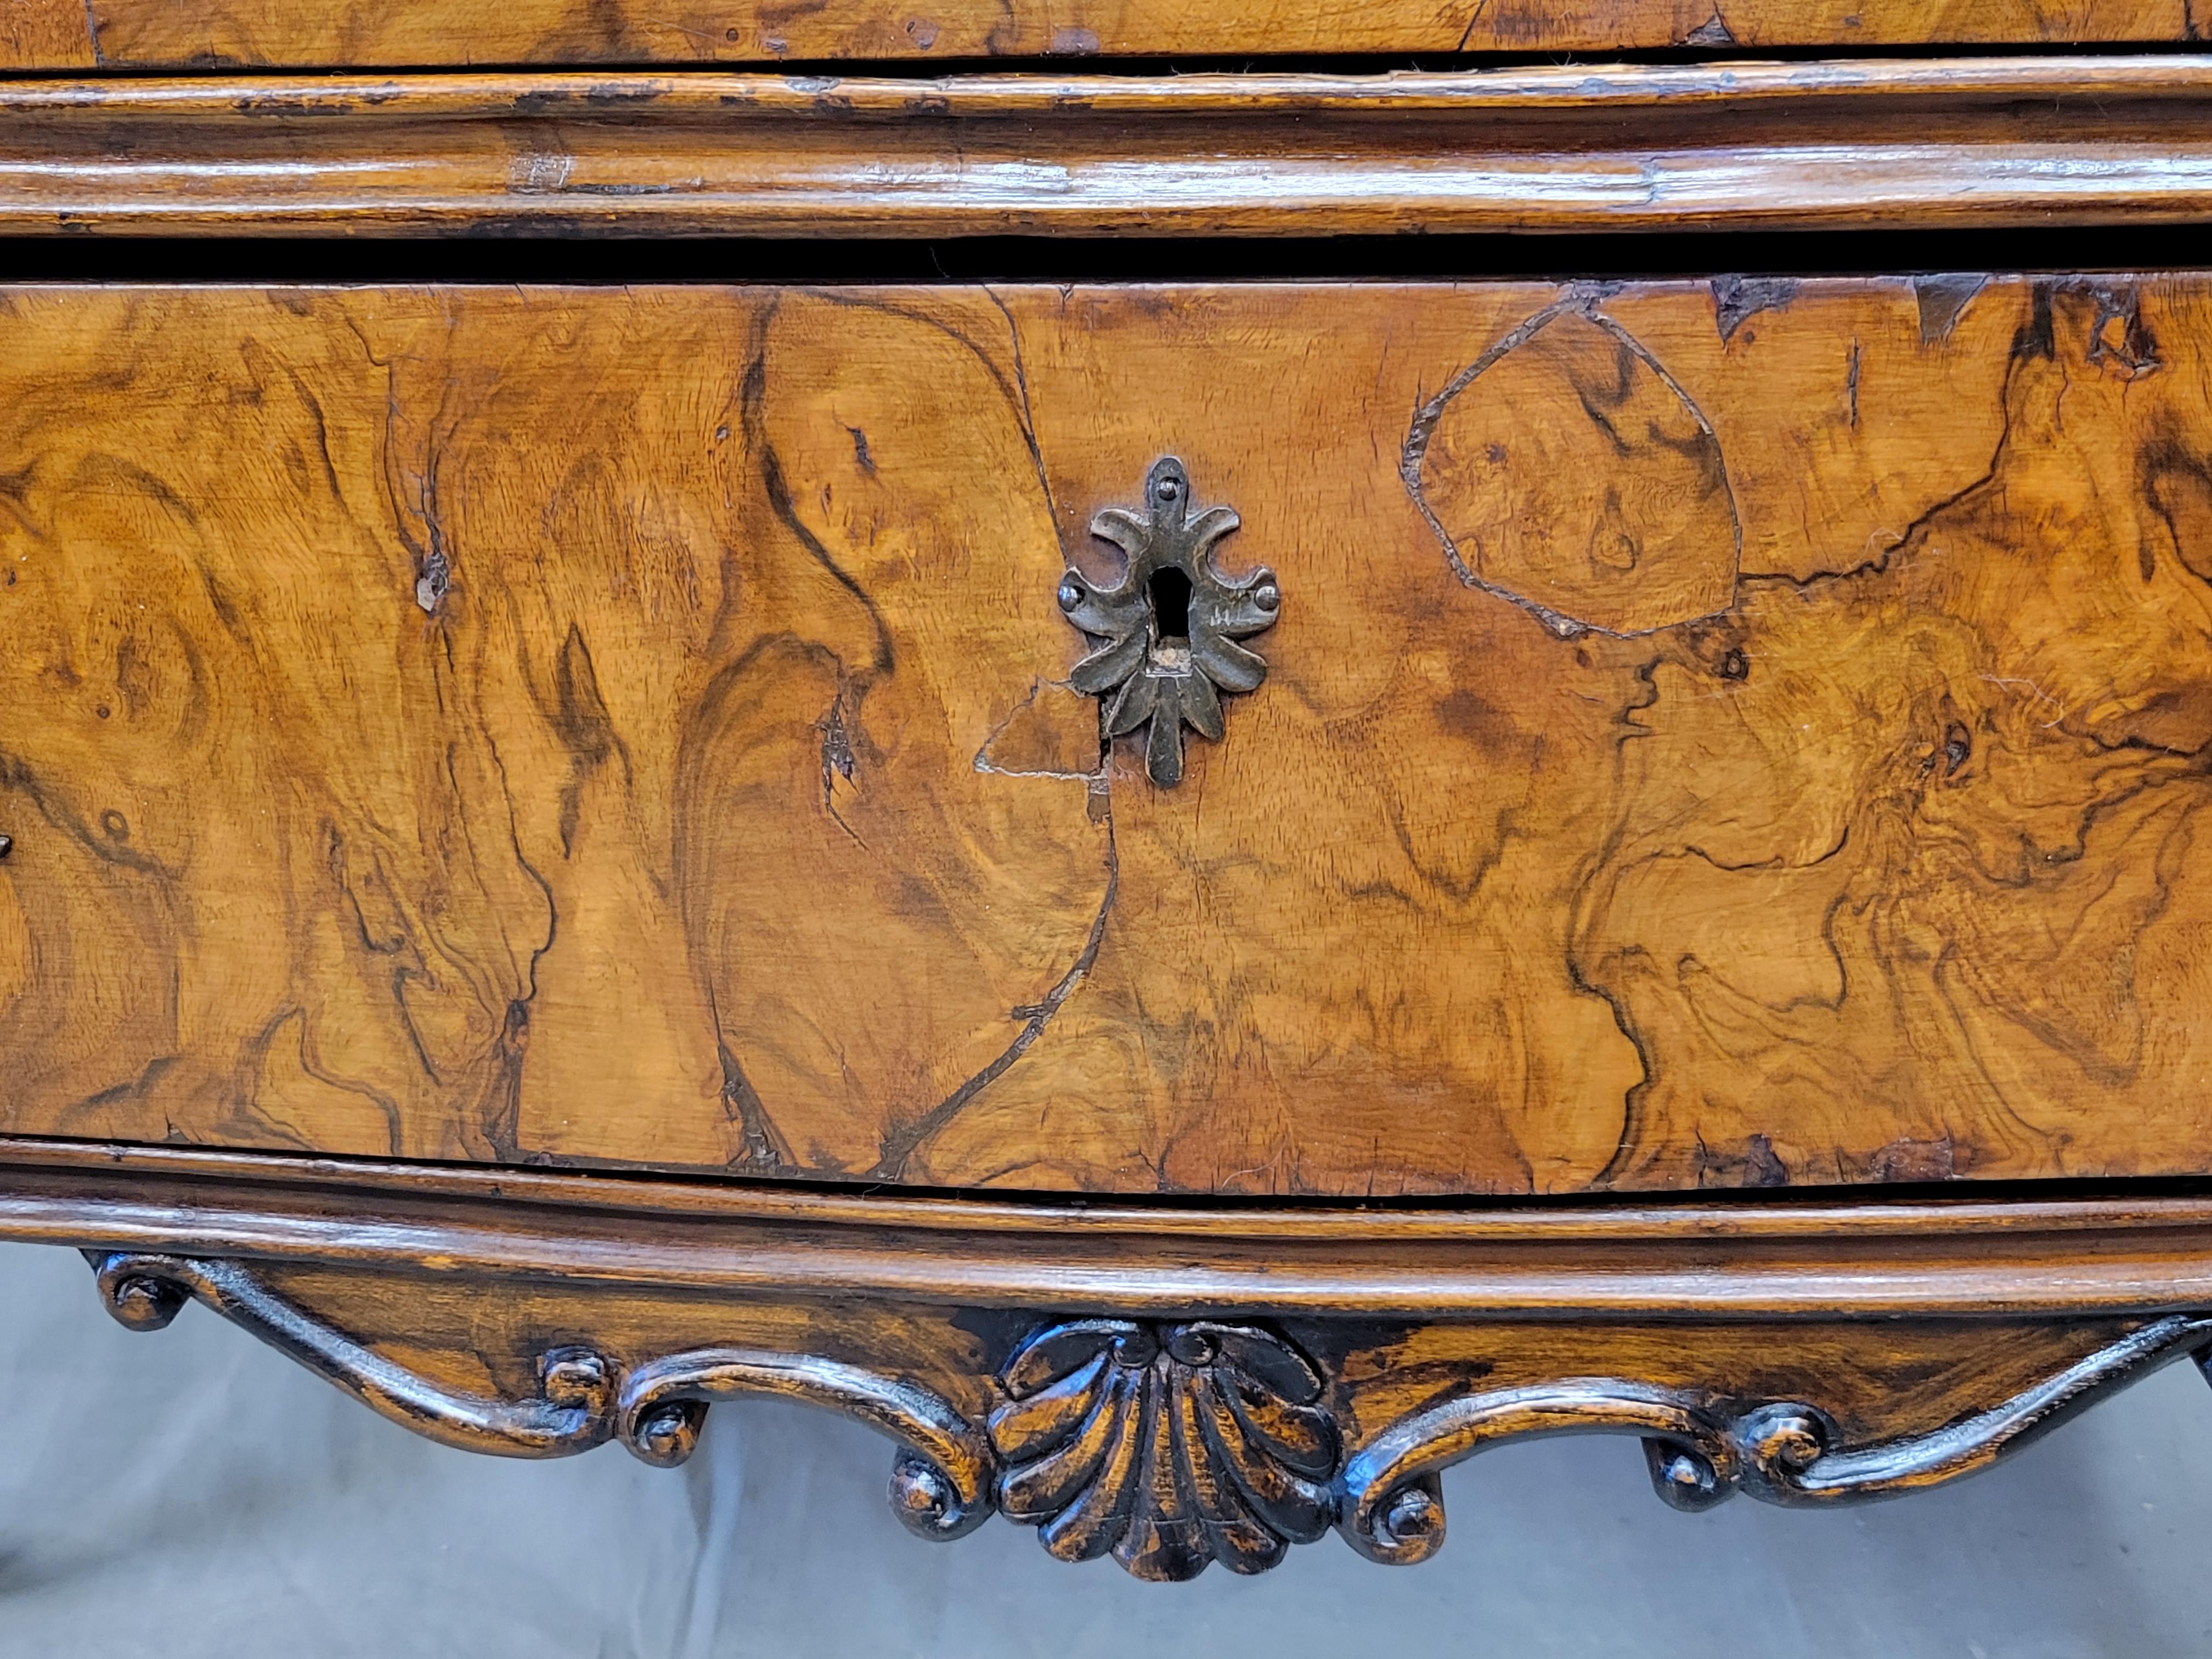 Antique Early 1800s French Burl Walnut Commode Sold by B. Altman & Co. New York 1